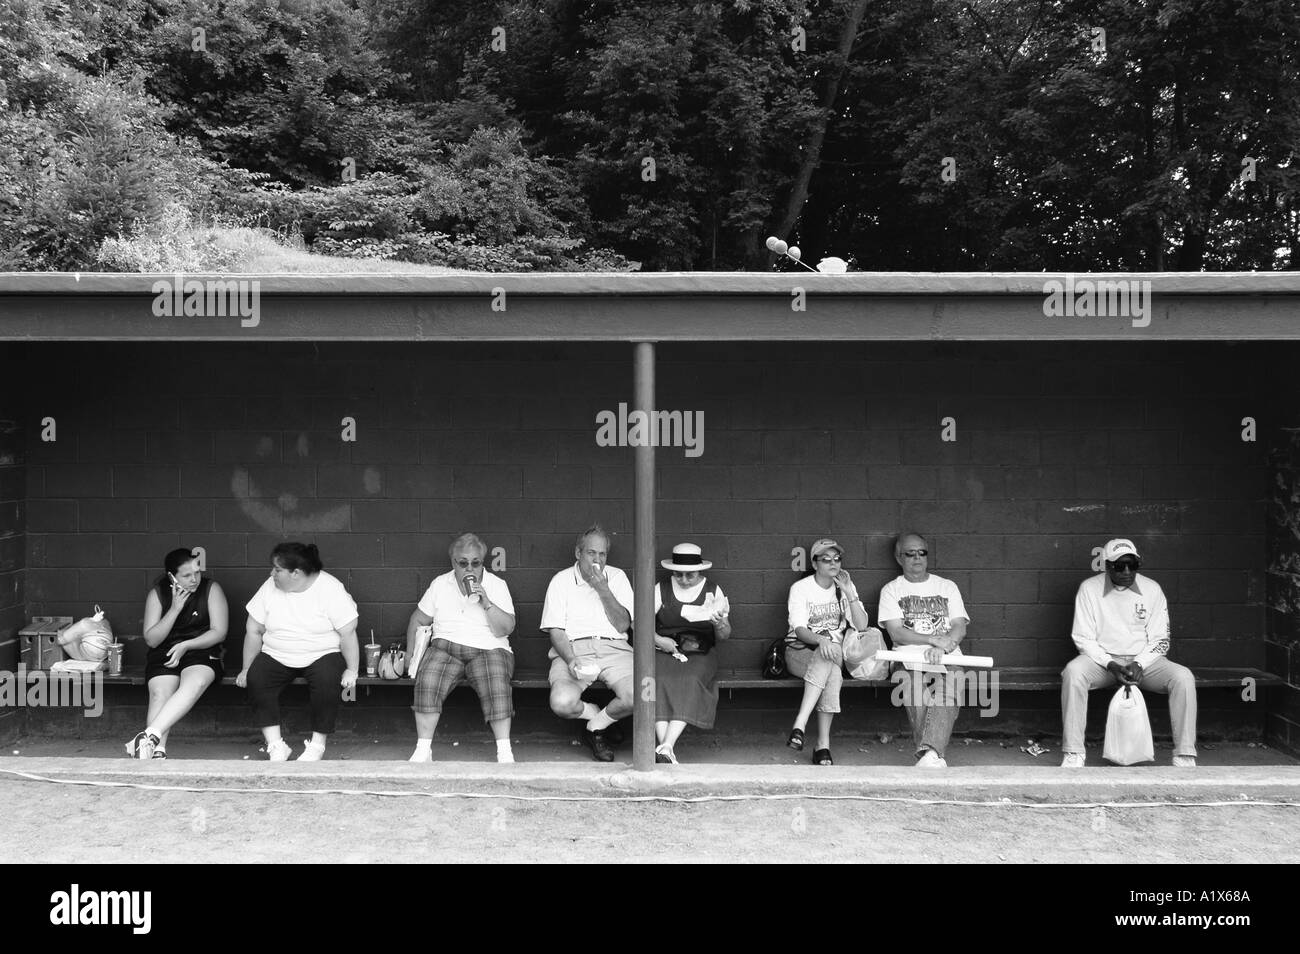 A row of people sitting in the shade on a baseball bench during a public festival in the summer in CT USA Stock Photo